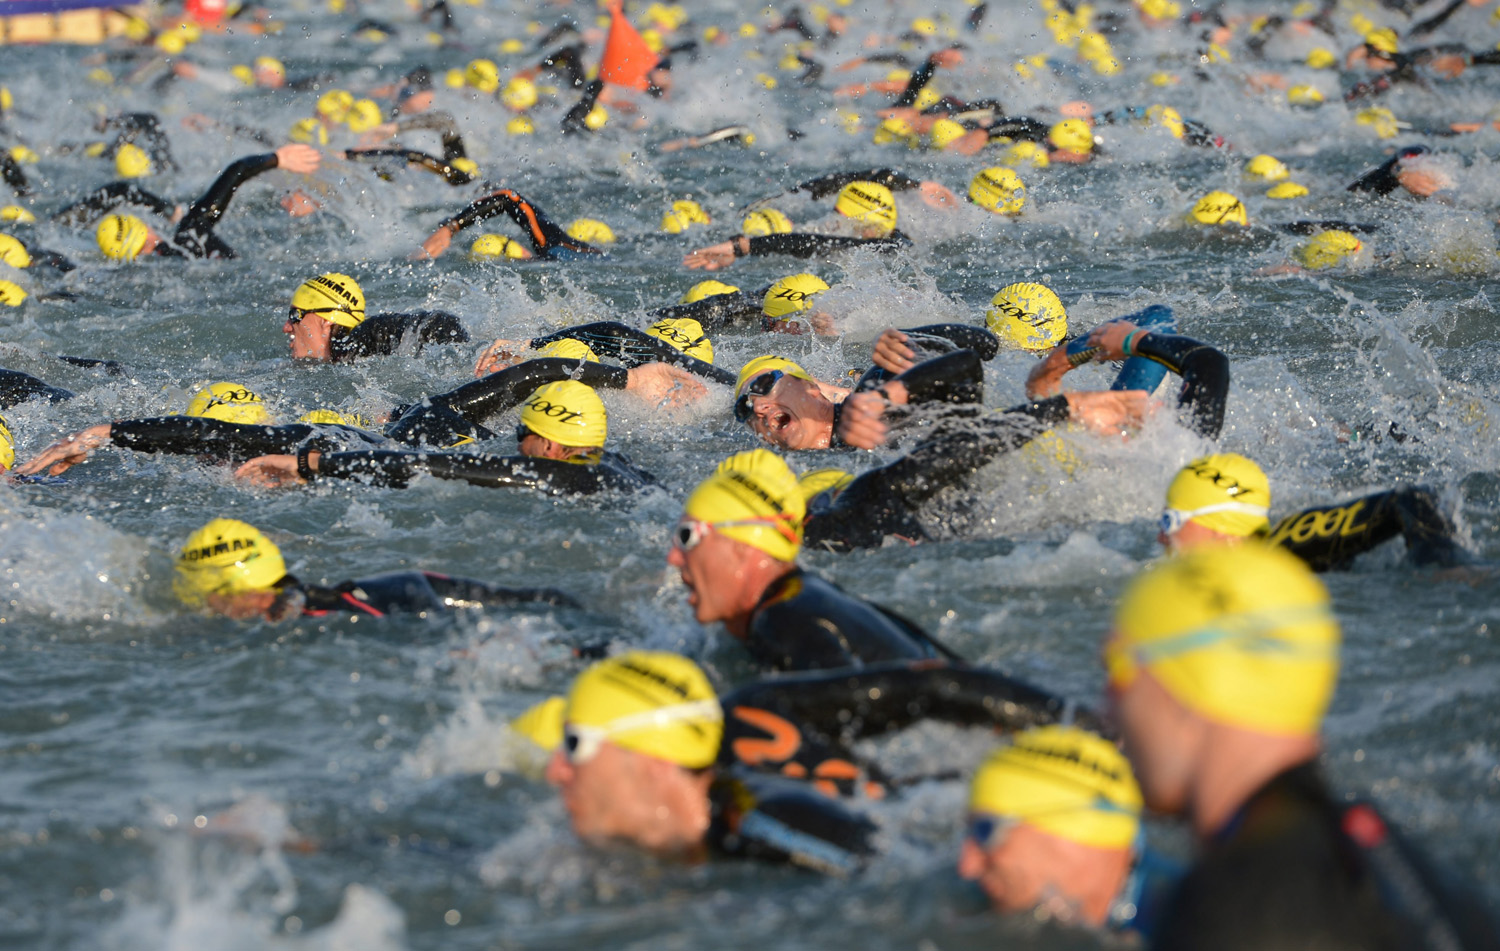 Participants plough the waters of the Forest Lake shortly after the start of the swimming stage of the Ironman European Championship in Langen, near Frankfurt, Germany, July 6, 2014.